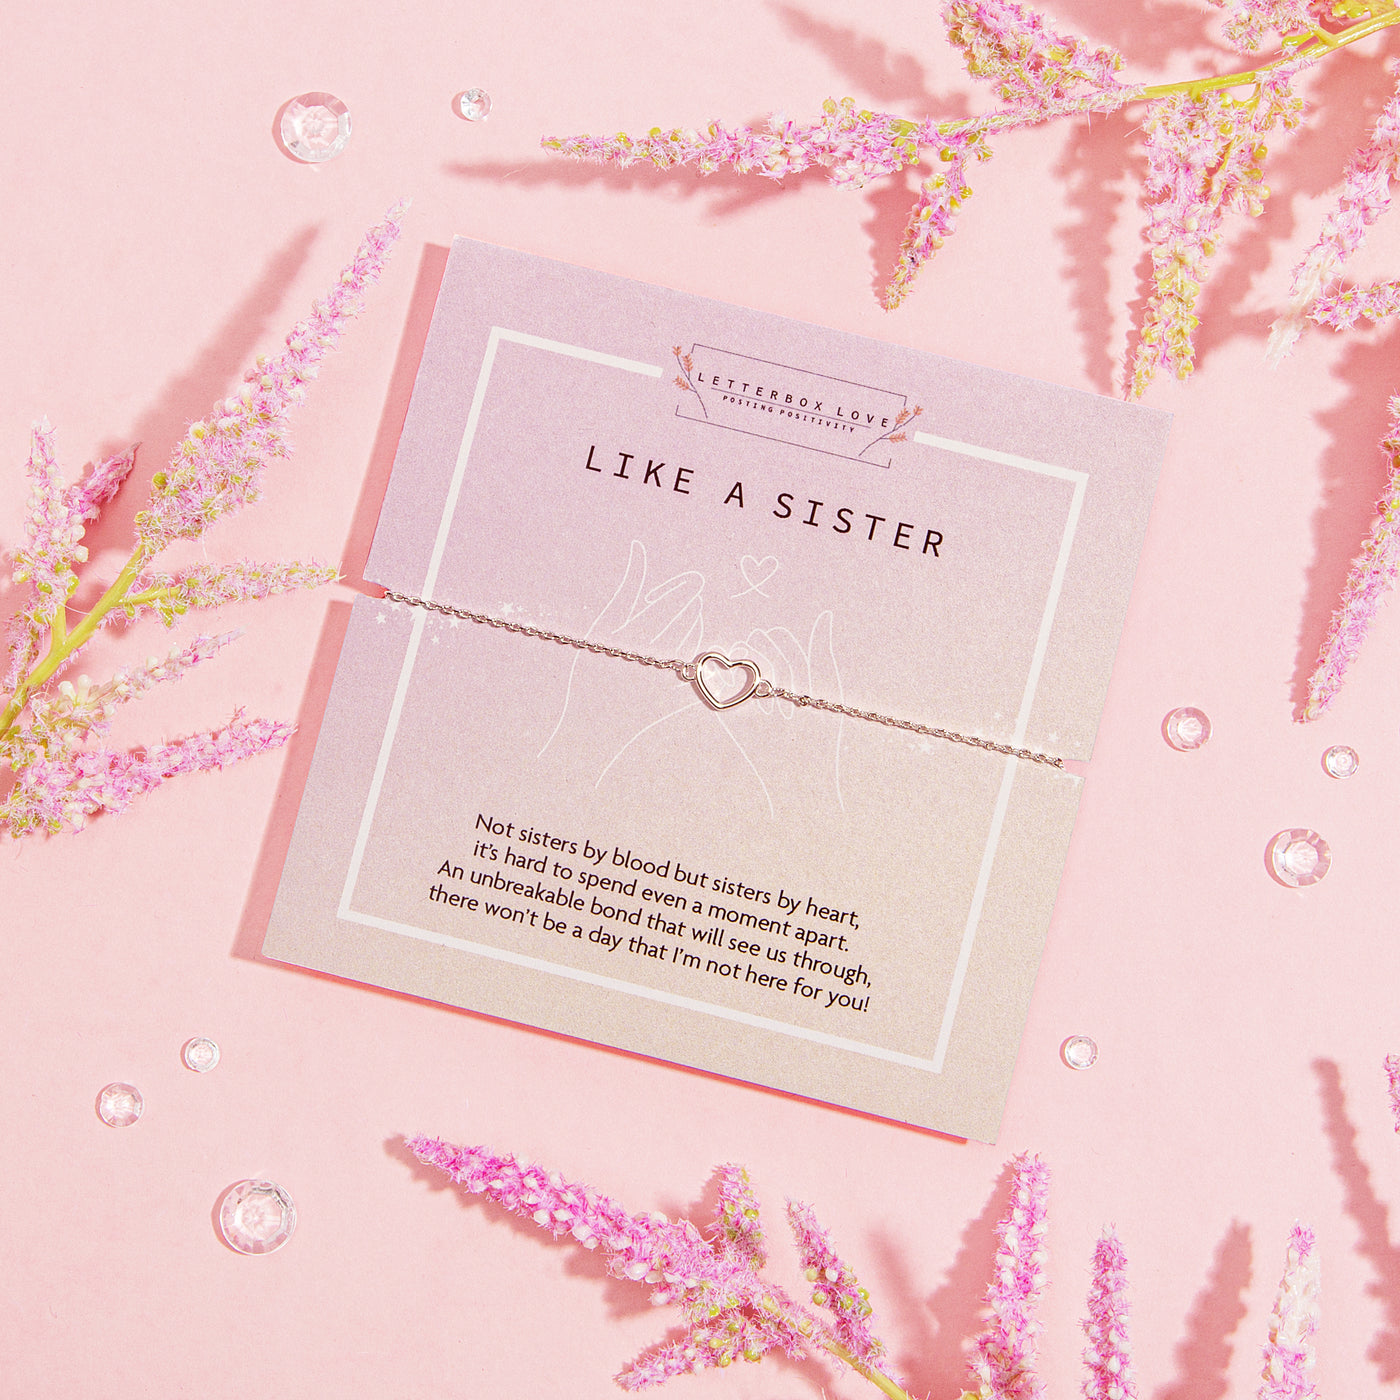 LIKE A SISTER' bracelet featuring a heart charm, presented on a muted pink card with a heartfelt message about the deep bond of friendship that's akin to sisterhood. The card is adorned with delicate pink blossoms and clear crystal gems, set against a soft pink backdrop